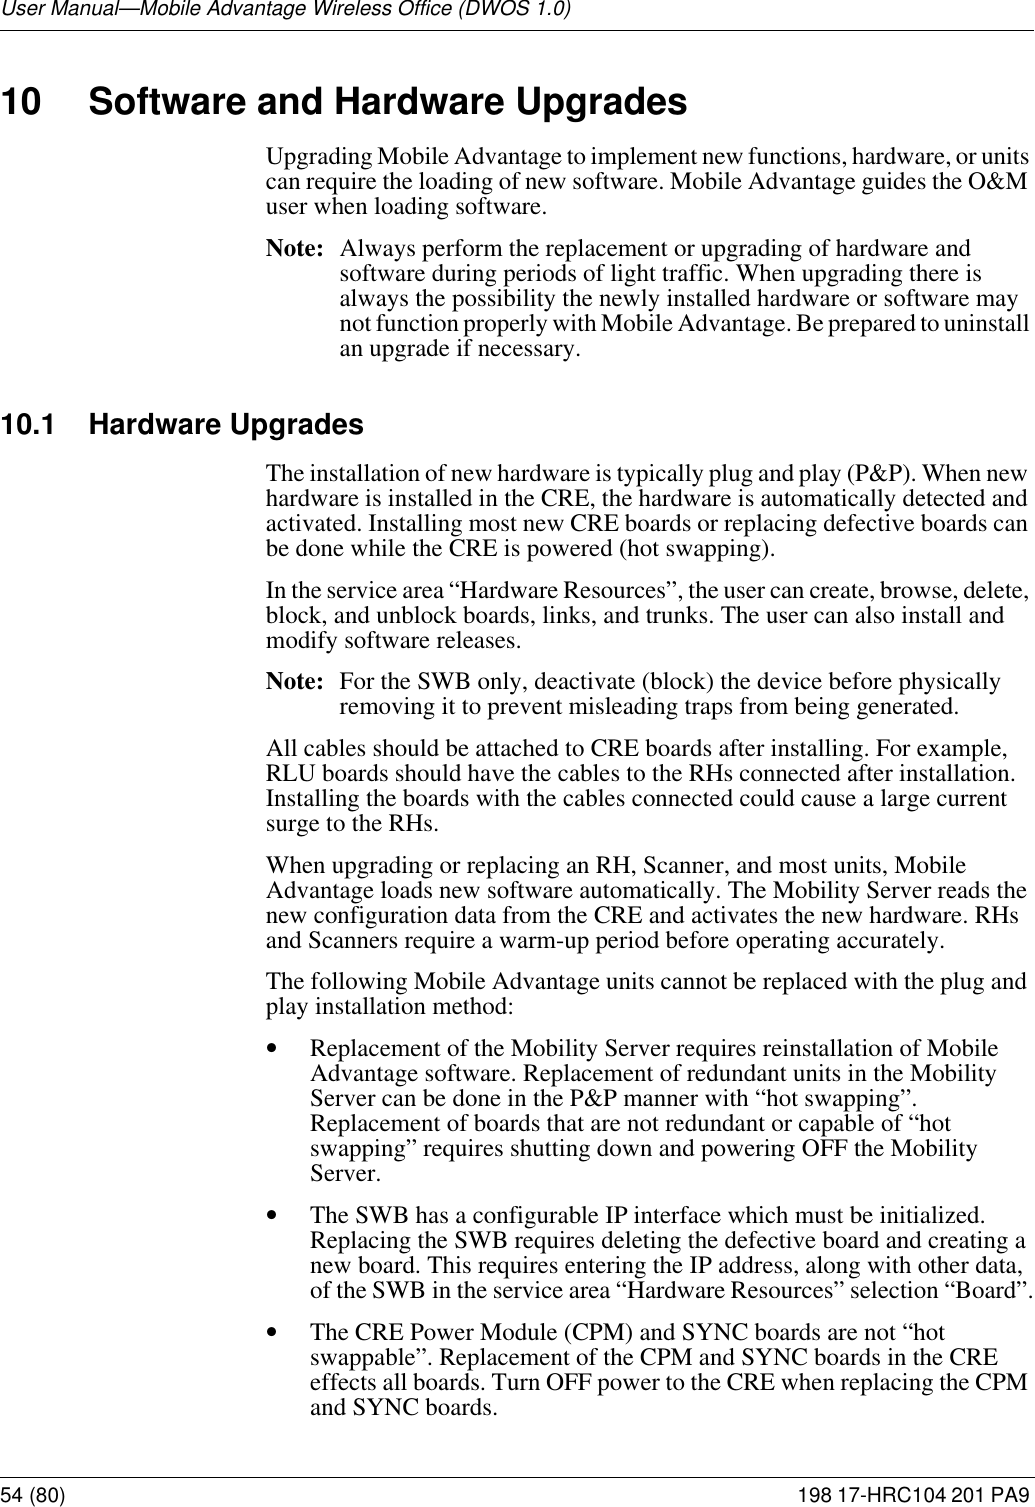 User Manual—Mobile Advantage Wireless Office (DWOS 1.0)54 (80) 198 17-HRC104 201 PA9 10 Software and Hardware UpgradesUpgrading Mobile Advantage to implement new functions, hardware, or units can require the loading of new software. Mobile Advantage guides the O&amp;M user when loading software.Note: Always perform the replacement or upgrading of hardware and software during periods of light traffic. When upgrading there is always the possibility the newly installed hardware or software may not function properly with Mobile Advantage. Be prepared to uninstall an upgrade if necessary. 10.1 Hardware UpgradesThe installation of new hardware is typically plug and play (P&amp;P). When new hardware is installed in the CRE, the hardware is automatically detected and activated. Installing most new CRE boards or replacing defective boards can be done while the CRE is powered (hot swapping). In the service area “Hardware Resources”, the user can create, browse, delete, block, and unblock boards, links, and trunks. The user can also install and modify software releases. Note: For the SWB only, deactivate (block) the device before physically removing it to prevent misleading traps from being generated. All cables should be attached to CRE boards after installing. For example, RLU boards should have the cables to the RHs connected after installation. Installing the boards with the cables connected could cause a large current surge to the RHs.When upgrading or replacing an RH, Scanner, and most units, Mobile Advantage loads new software automatically. The Mobility Server reads the new configuration data from the CRE and activates the new hardware. RHs and Scanners require a warm-up period before operating accurately.The following Mobile Advantage units cannot be replaced with the plug and play installation method:•Replacement of the Mobility Server requires reinstallation of Mobile Advantage software. Replacement of redundant units in the Mobility Server can be done in the P&amp;P manner with “hot swapping”. Replacement of boards that are not redundant or capable of “hot swapping” requires shutting down and powering OFF the Mobility Server. •The SWB has a configurable IP interface which must be initialized. Replacing the SWB requires deleting the defective board and creating a new board. This requires entering the IP address, along with other data, of the SWB in the service area “Hardware Resources” selection “Board”.•The CRE Power Module (CPM) and SYNC boards are not “hot swappable”. Replacement of the CPM and SYNC boards in the CRE effects all boards. Turn OFF power to the CRE when replacing the CPM and SYNC boards. 